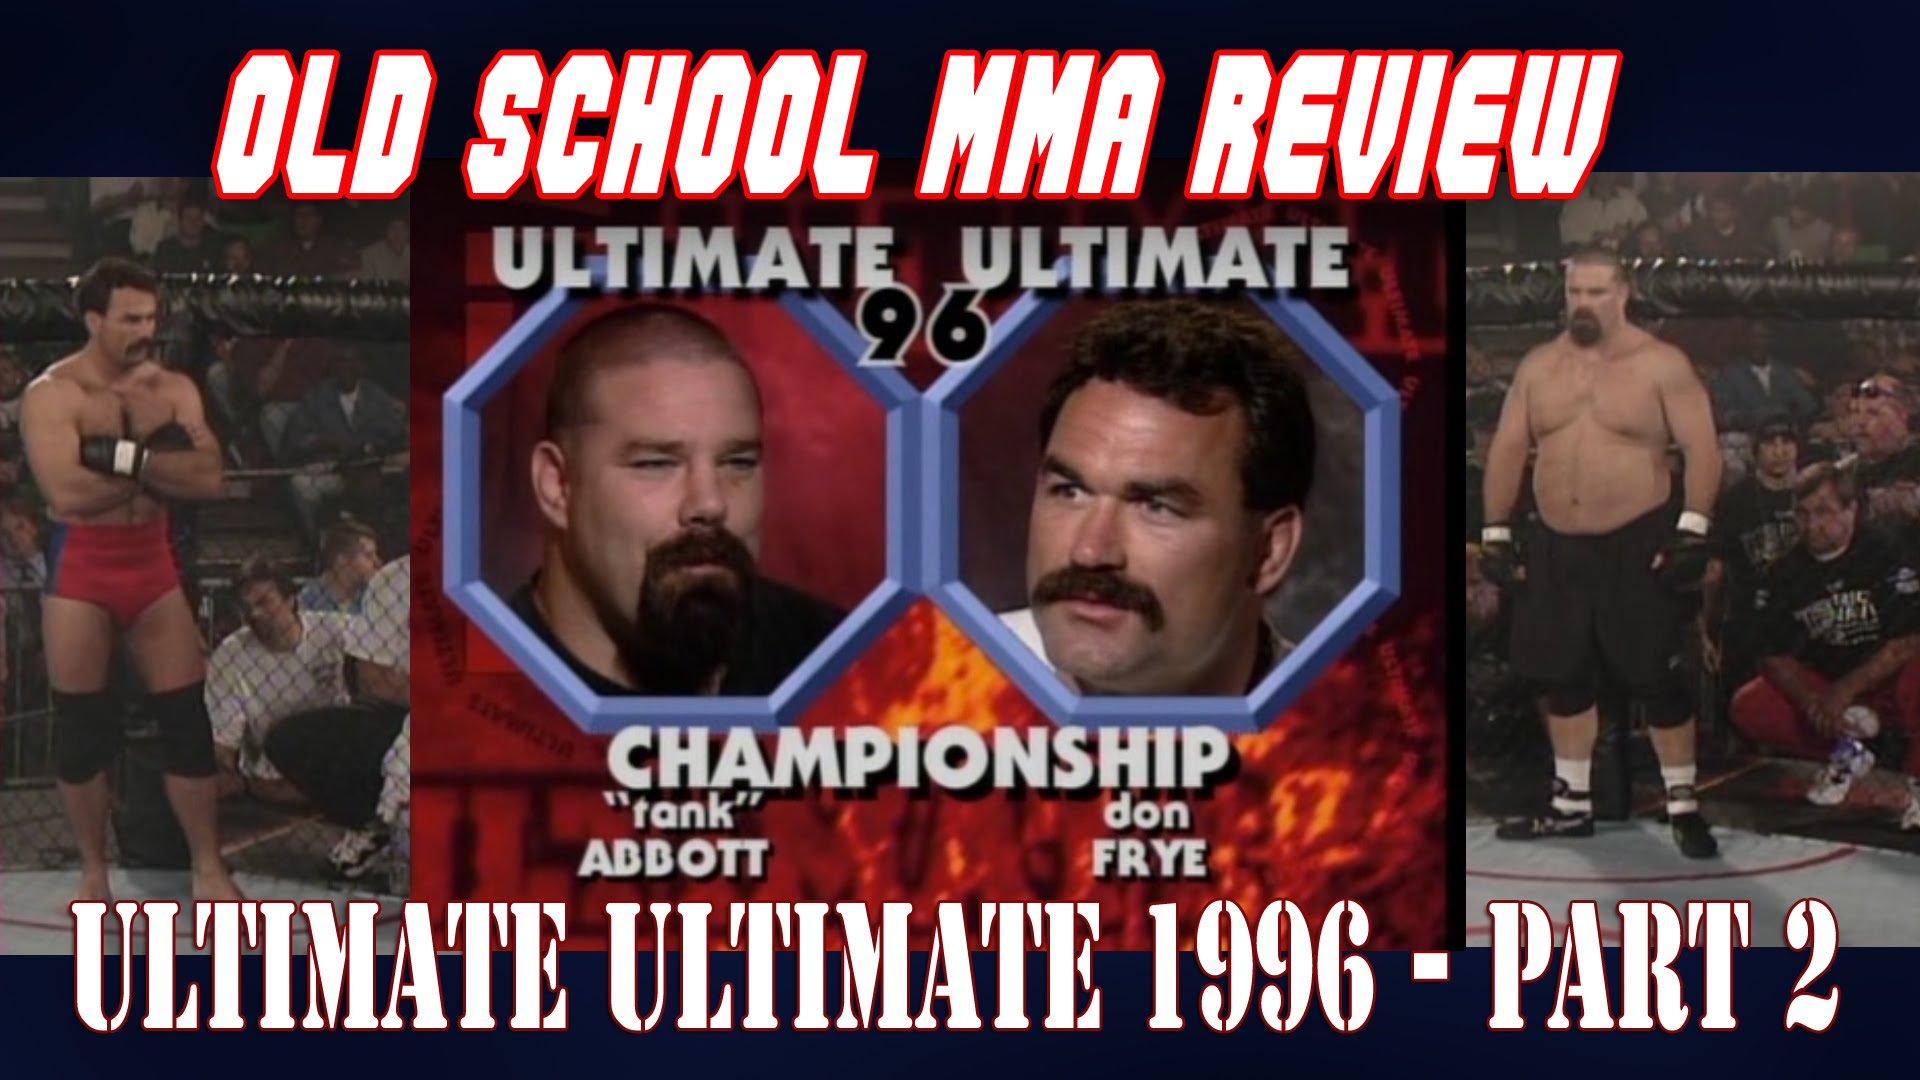 Old School MMA Review - UFC Ultimate Ultimate 1996, Part 2 MMA Video1920 x 1080